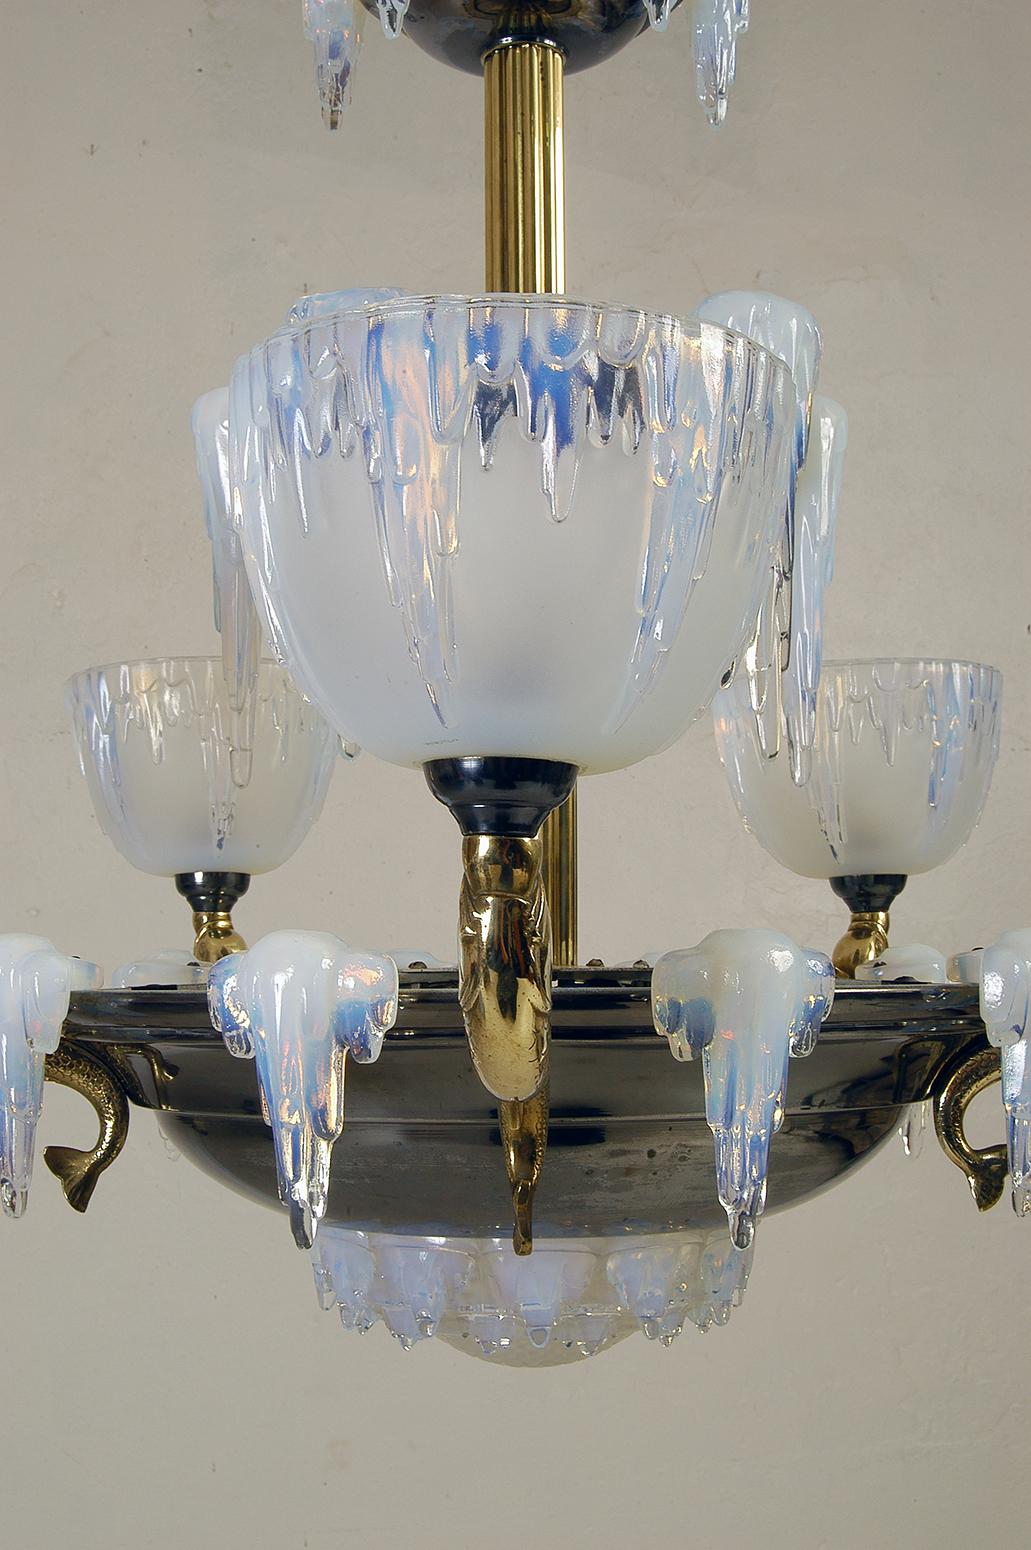 Magnificent 1930s French High Art Deco ‘Icicle’ chandelier by Henri Petitot, Lyon France. The spectacular opalescent glasswork is by Ezan, Paris.
From the central polished reeded brass stem hang three graduated nickel plated brass tiers. From the